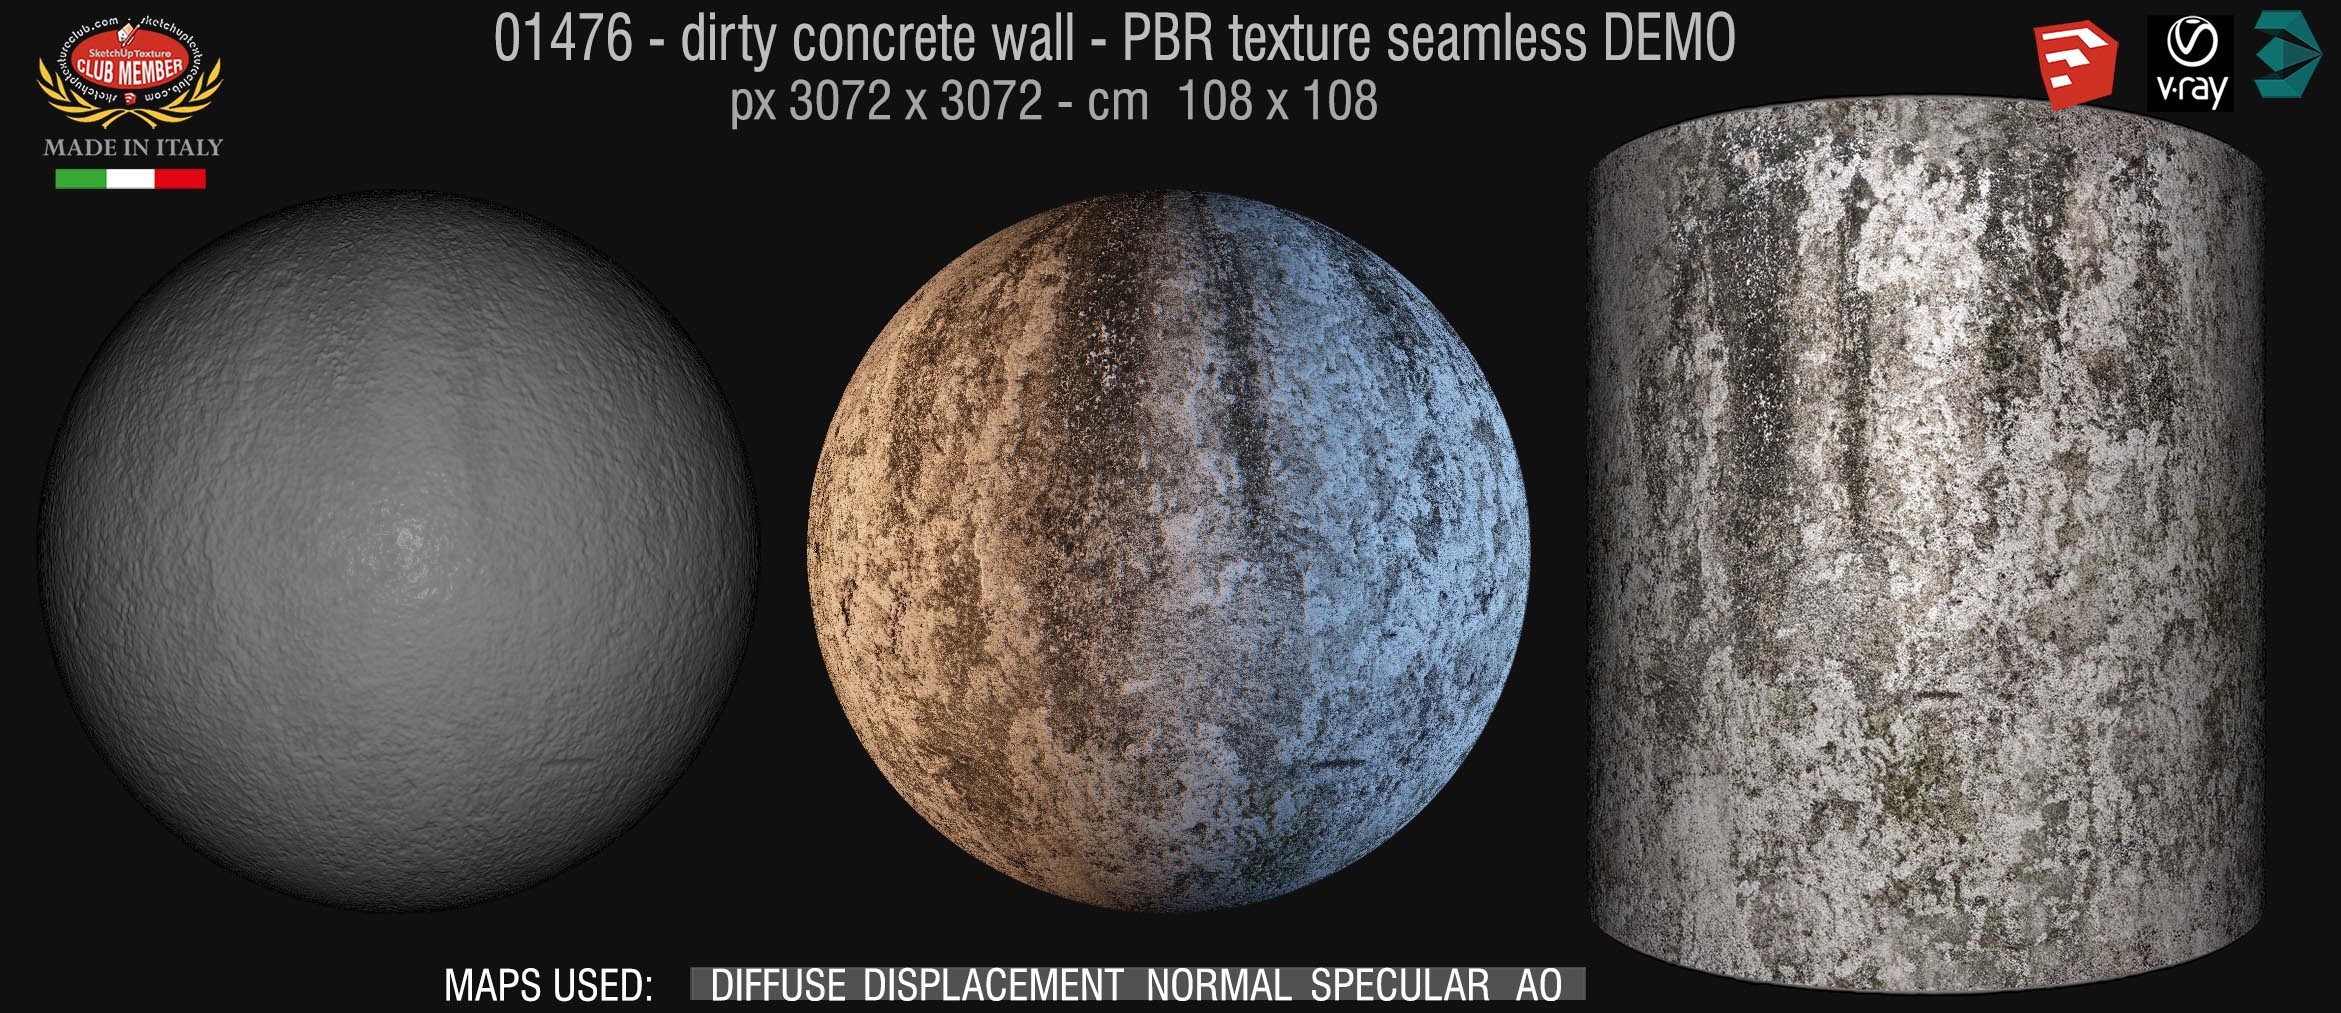 01476 Concrete bare dirty wall PBR texture seamless DEMO